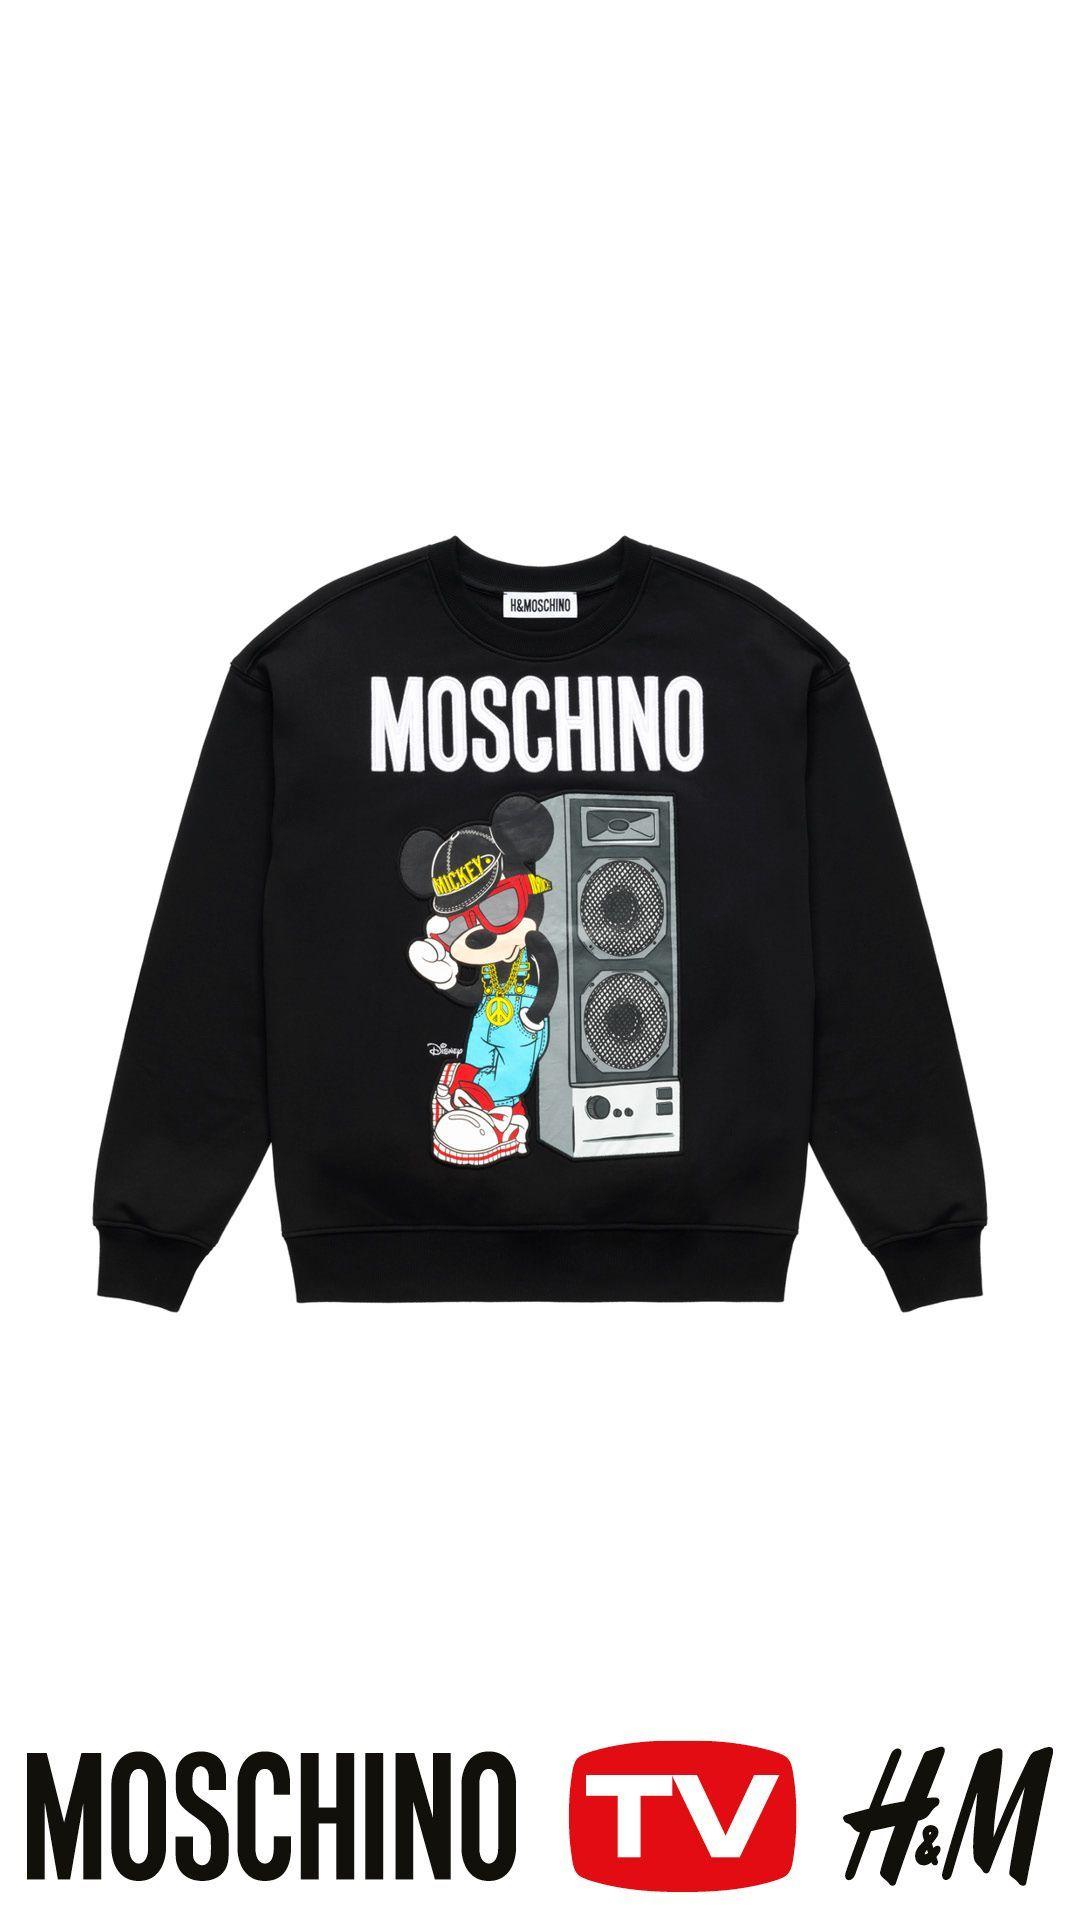 H&M Clothing Logo - MOSCHINO [tv] H&M Features Bold Streetwear Inspired Clothing